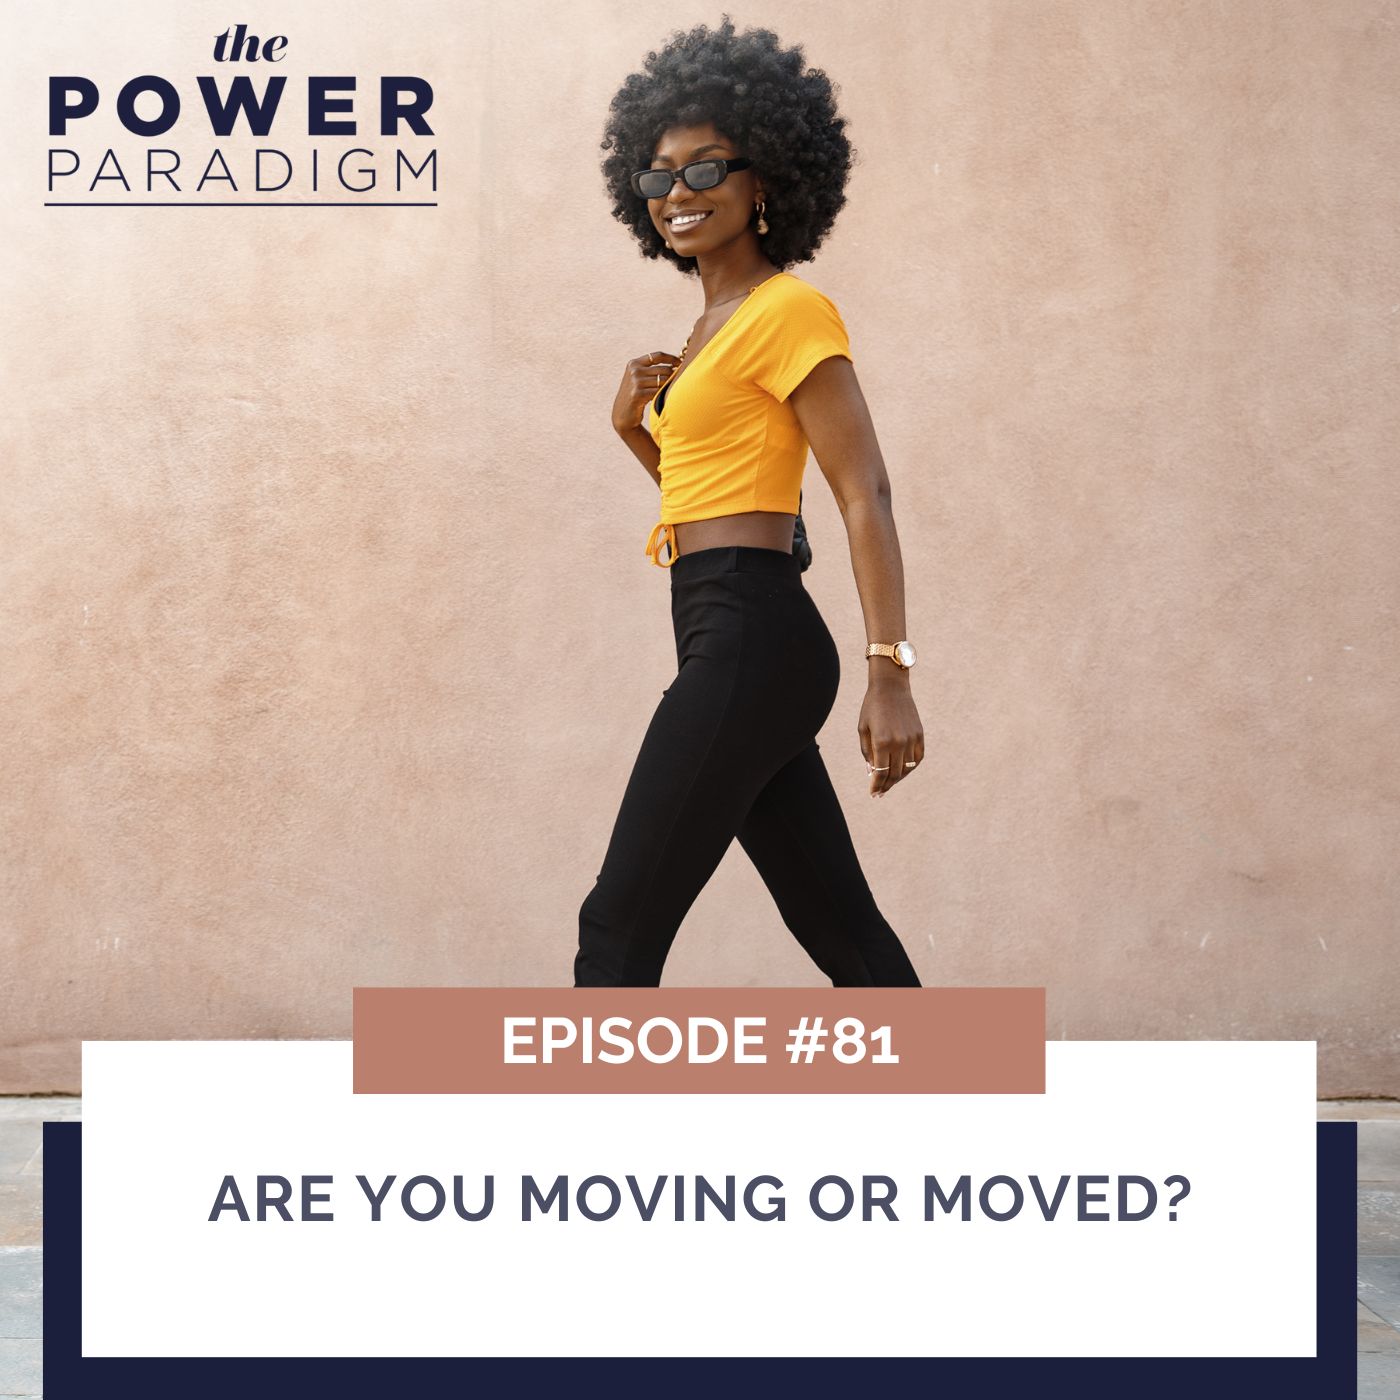 The Power Paradigm™ | Are You Moving or Moved?